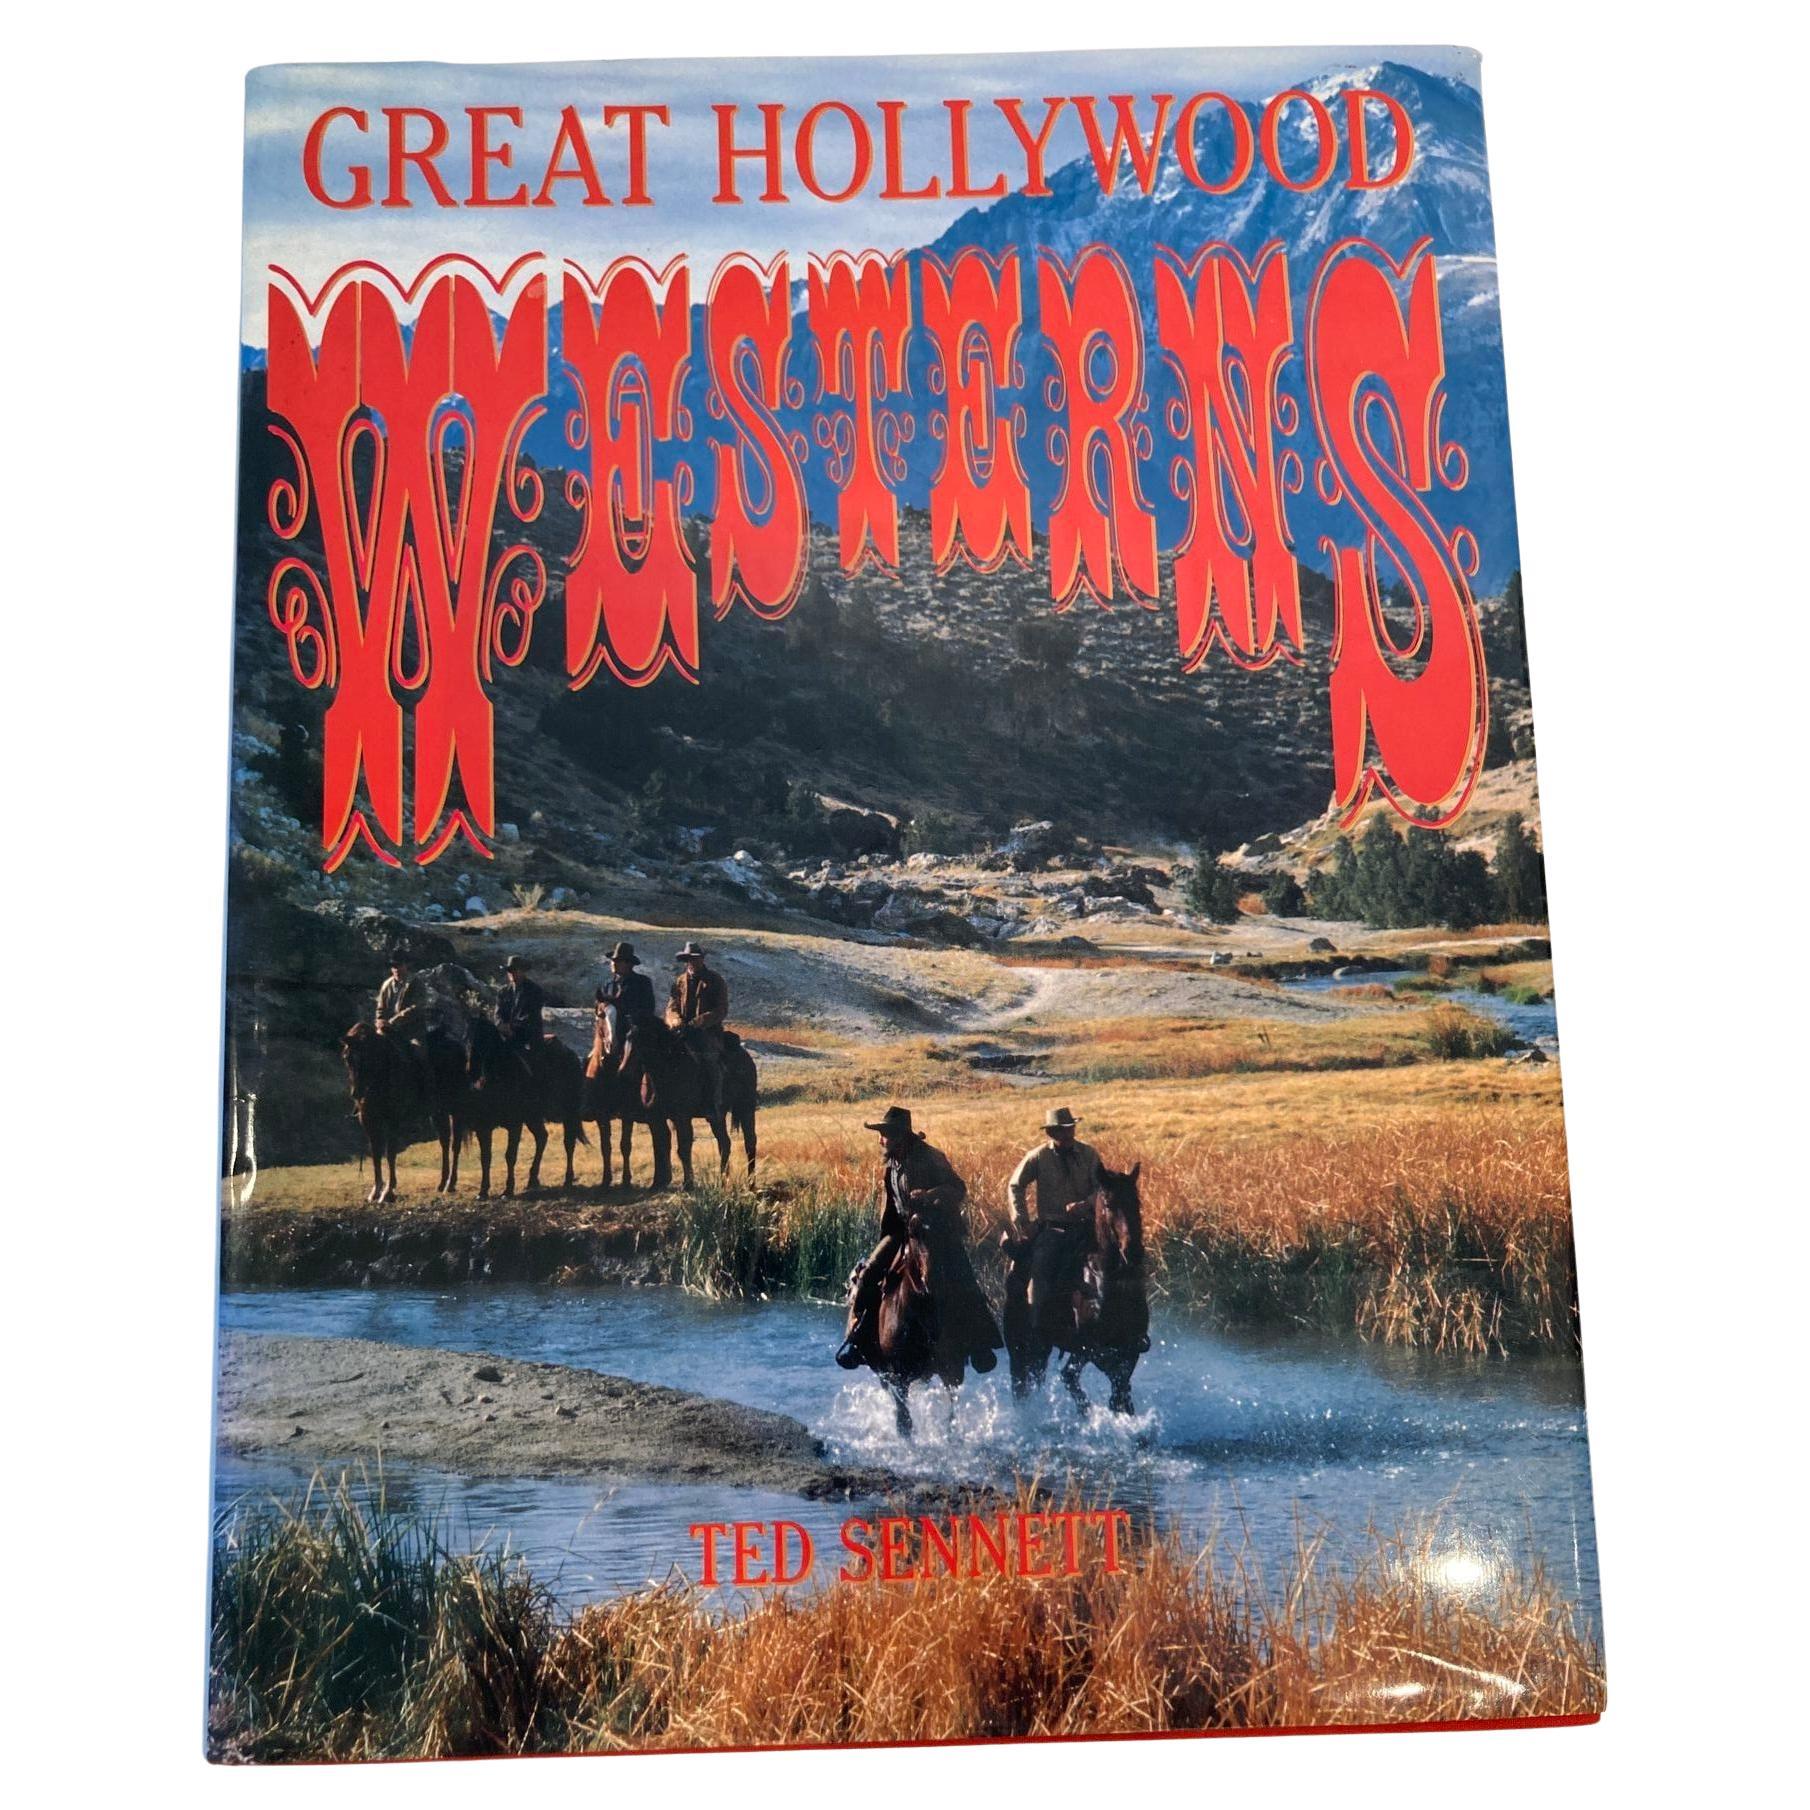 Great Hollywood Westerns Hardcover Book by Ted Sennett